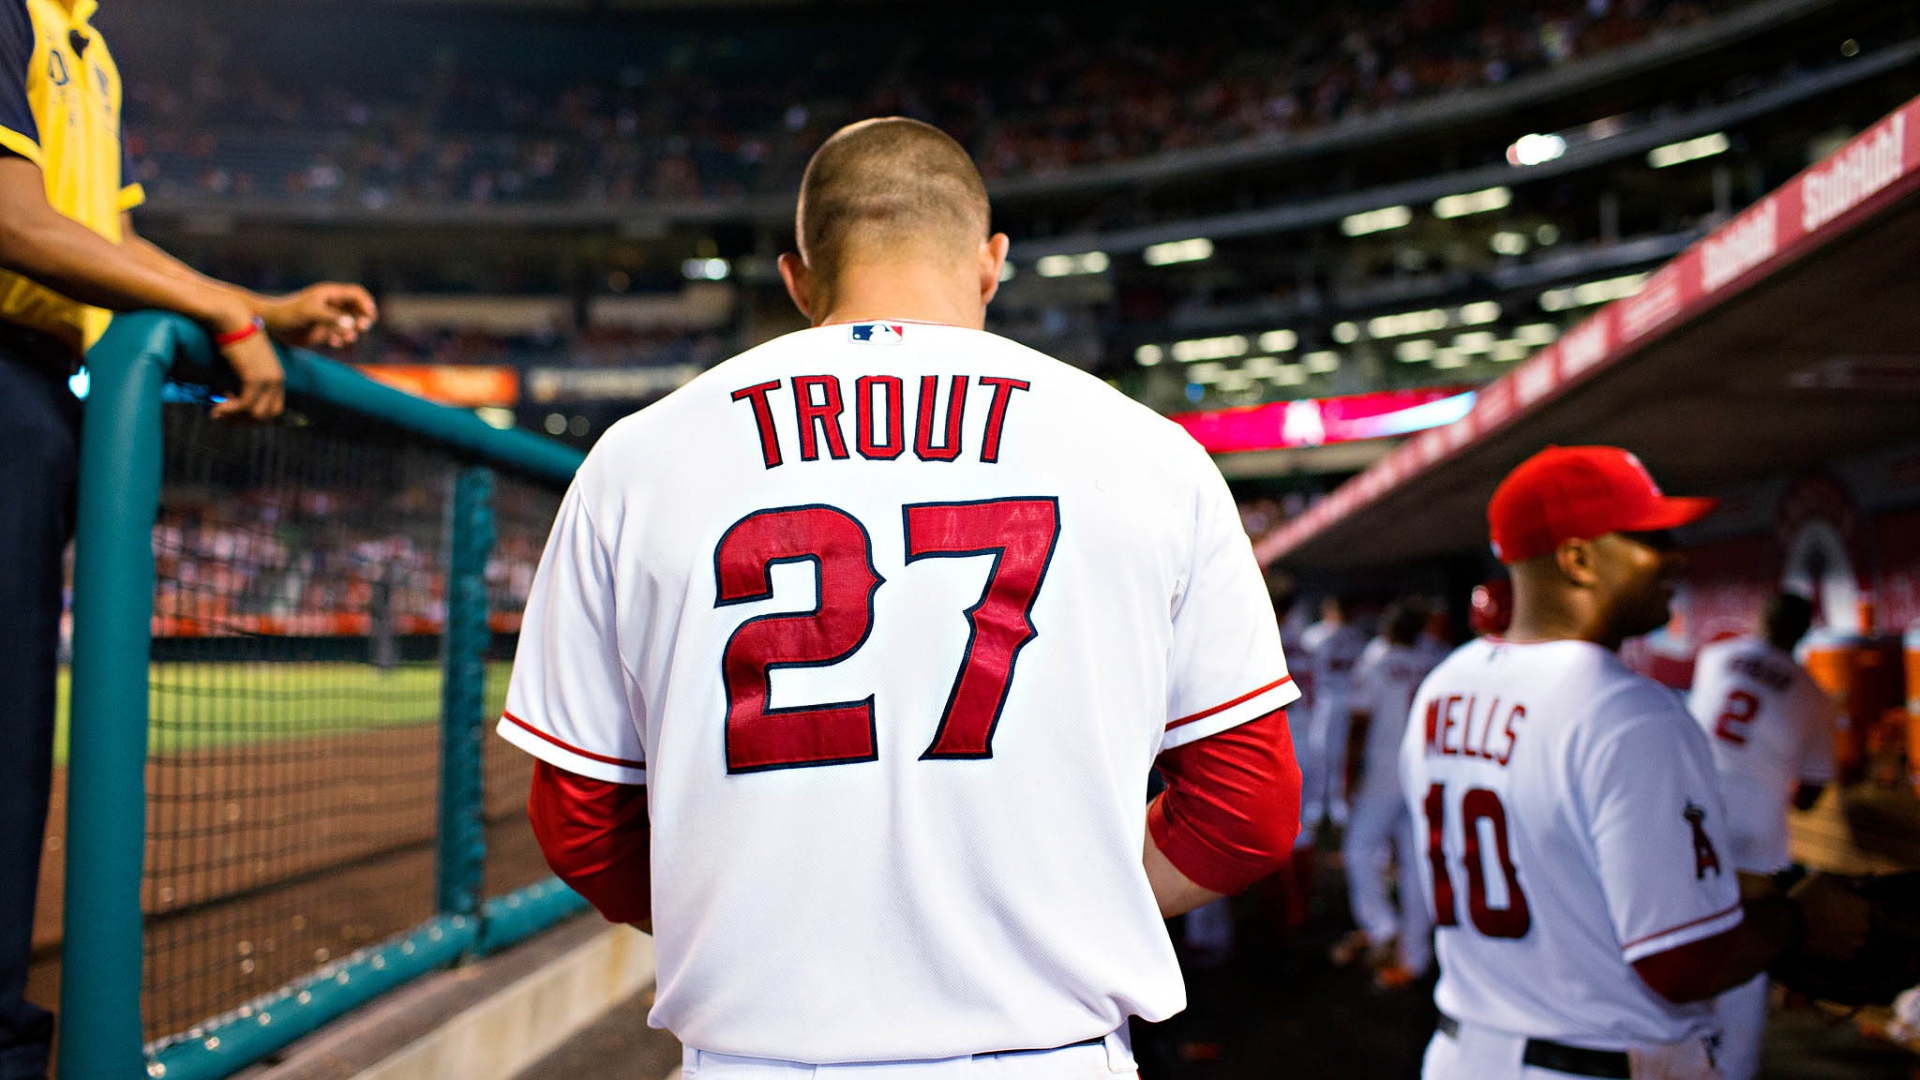 Download Wallpaper 1920x1080 Mike trout, Baseball, Los angeles